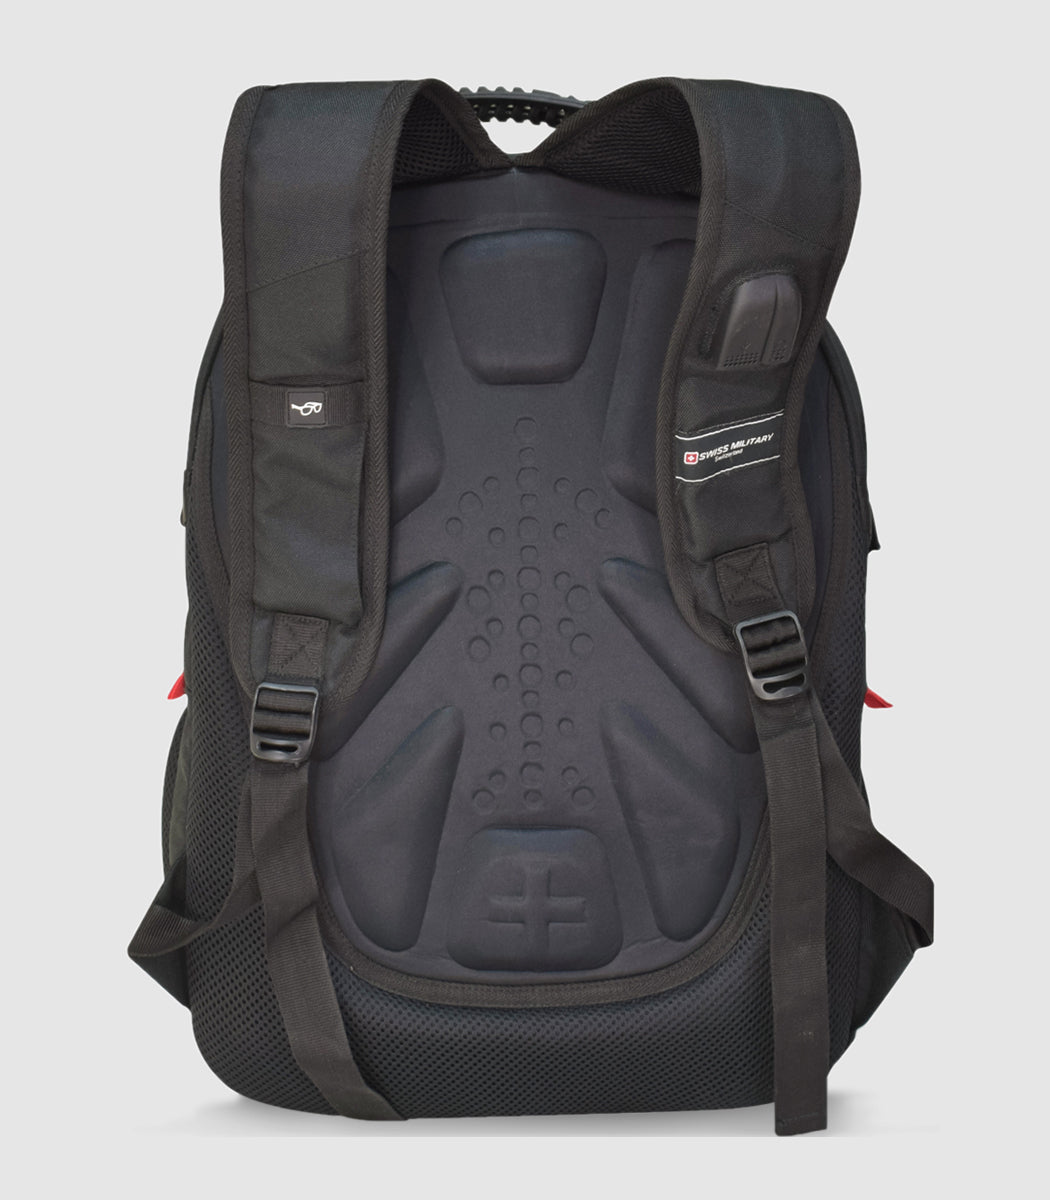 LBP76 – Laptop Backpack with USB Charging / AUX Port